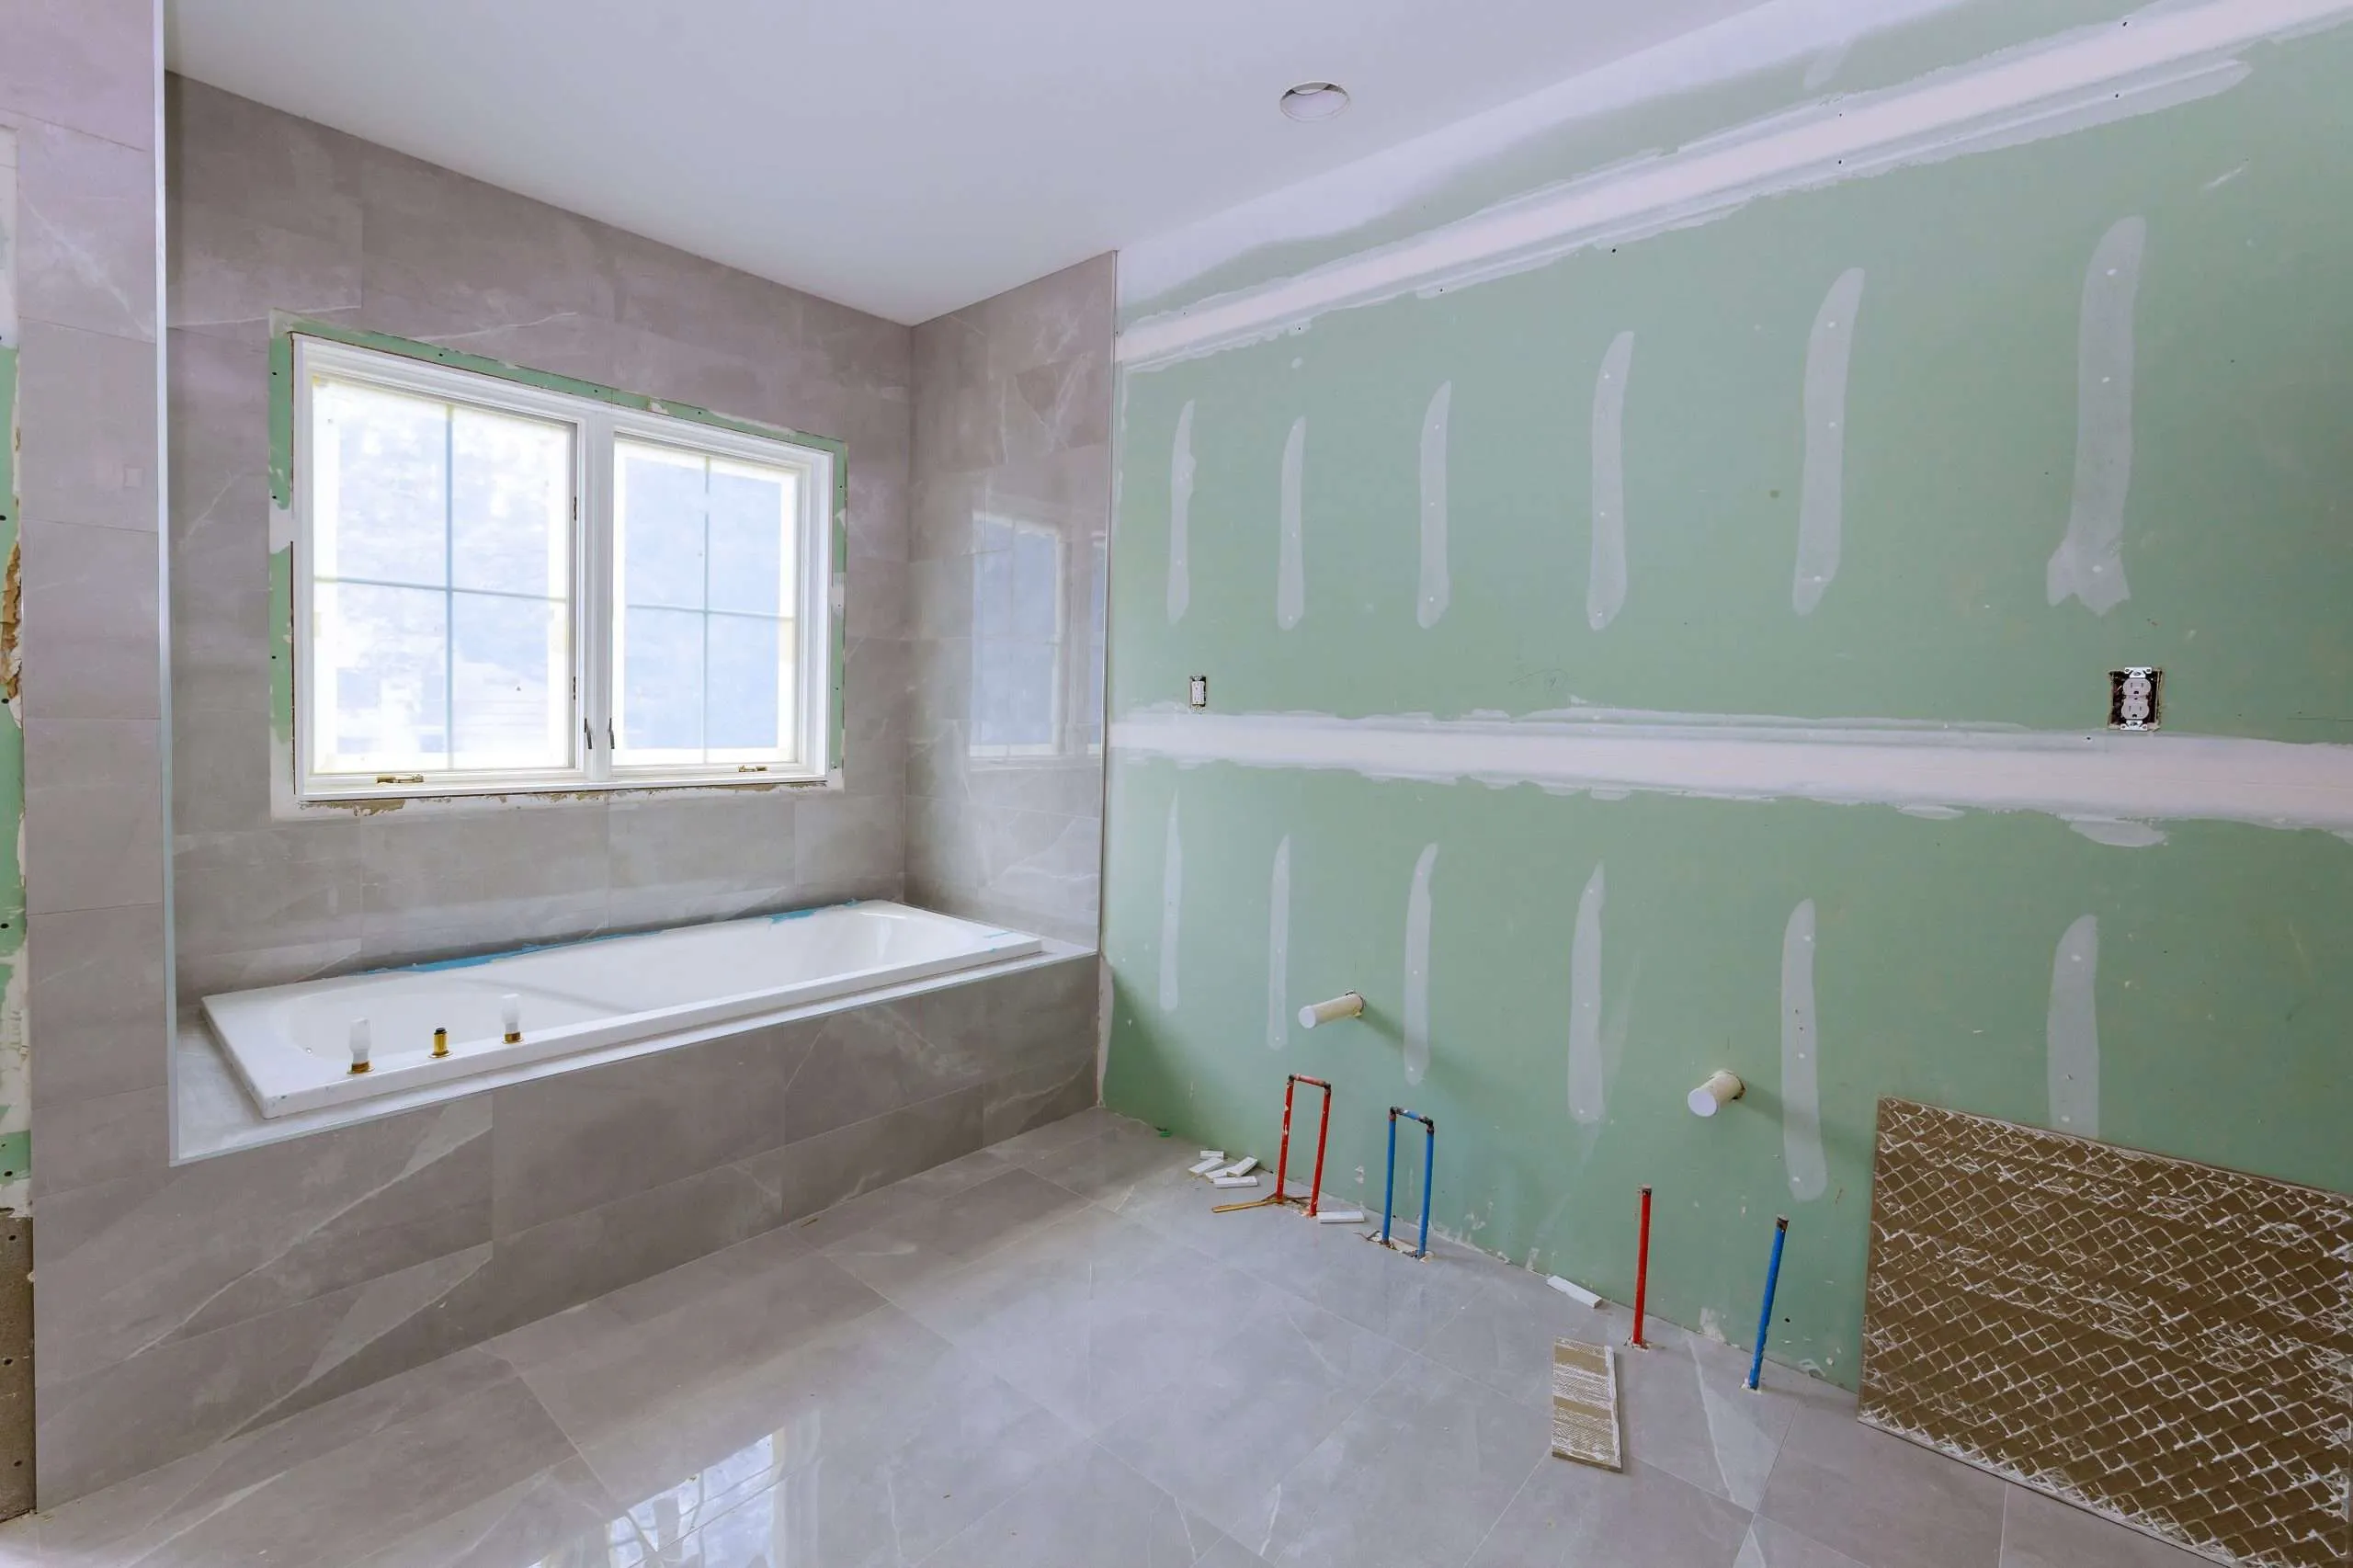 Four Steps To Prioritize Your Sarasota Home Remodeling Projects